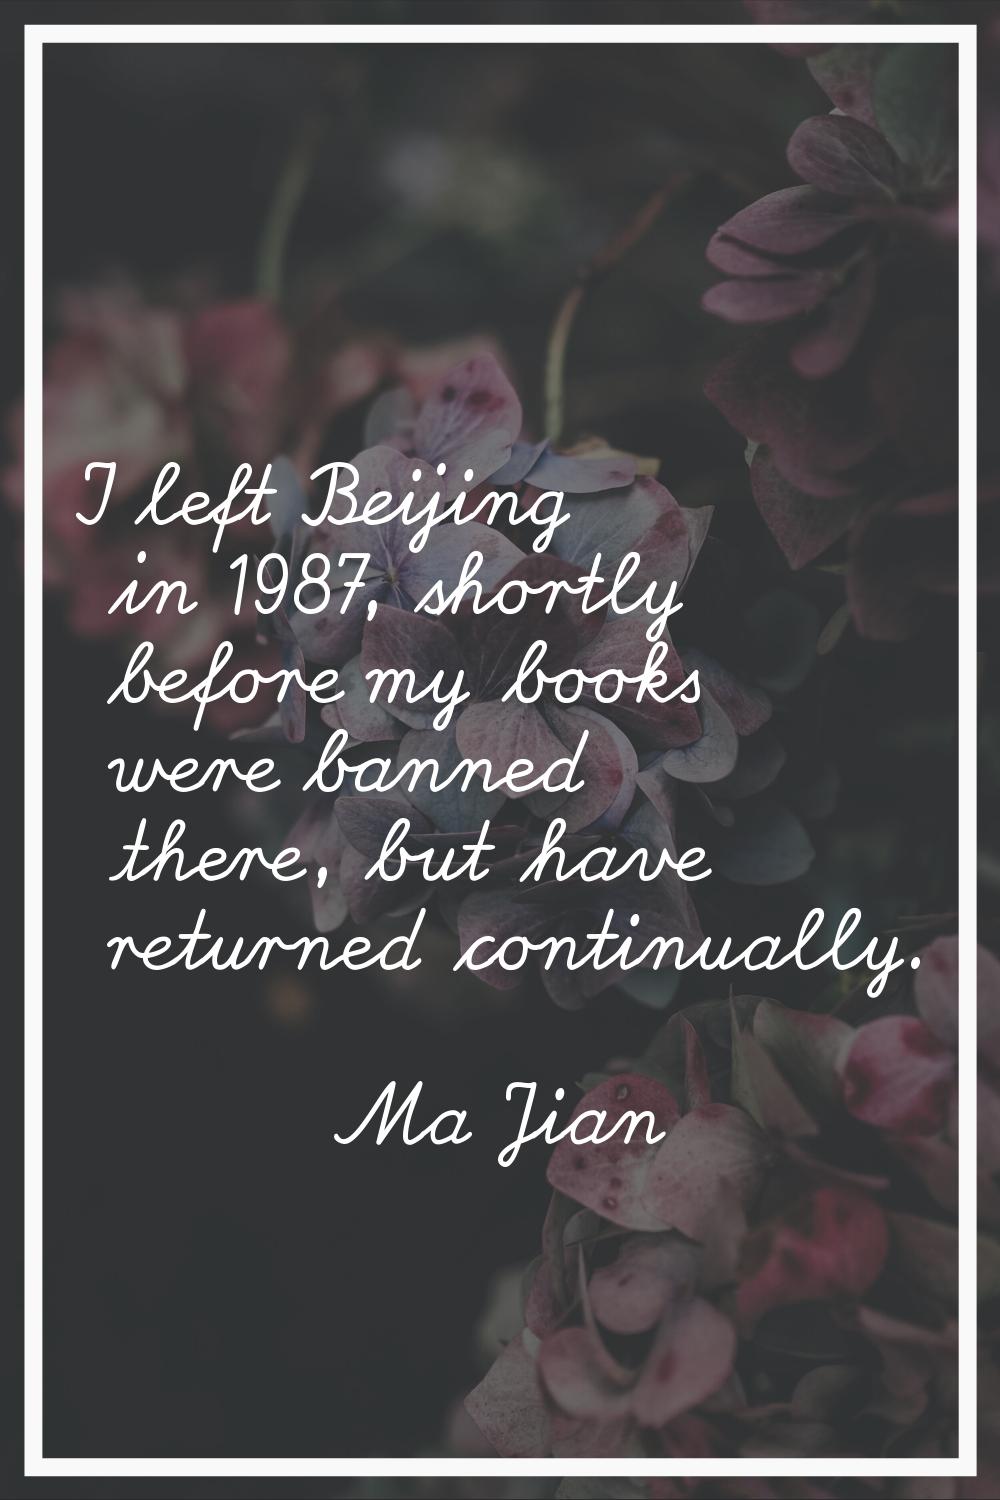 I left Beijing in 1987, shortly before my books were banned there, but have returned continually.